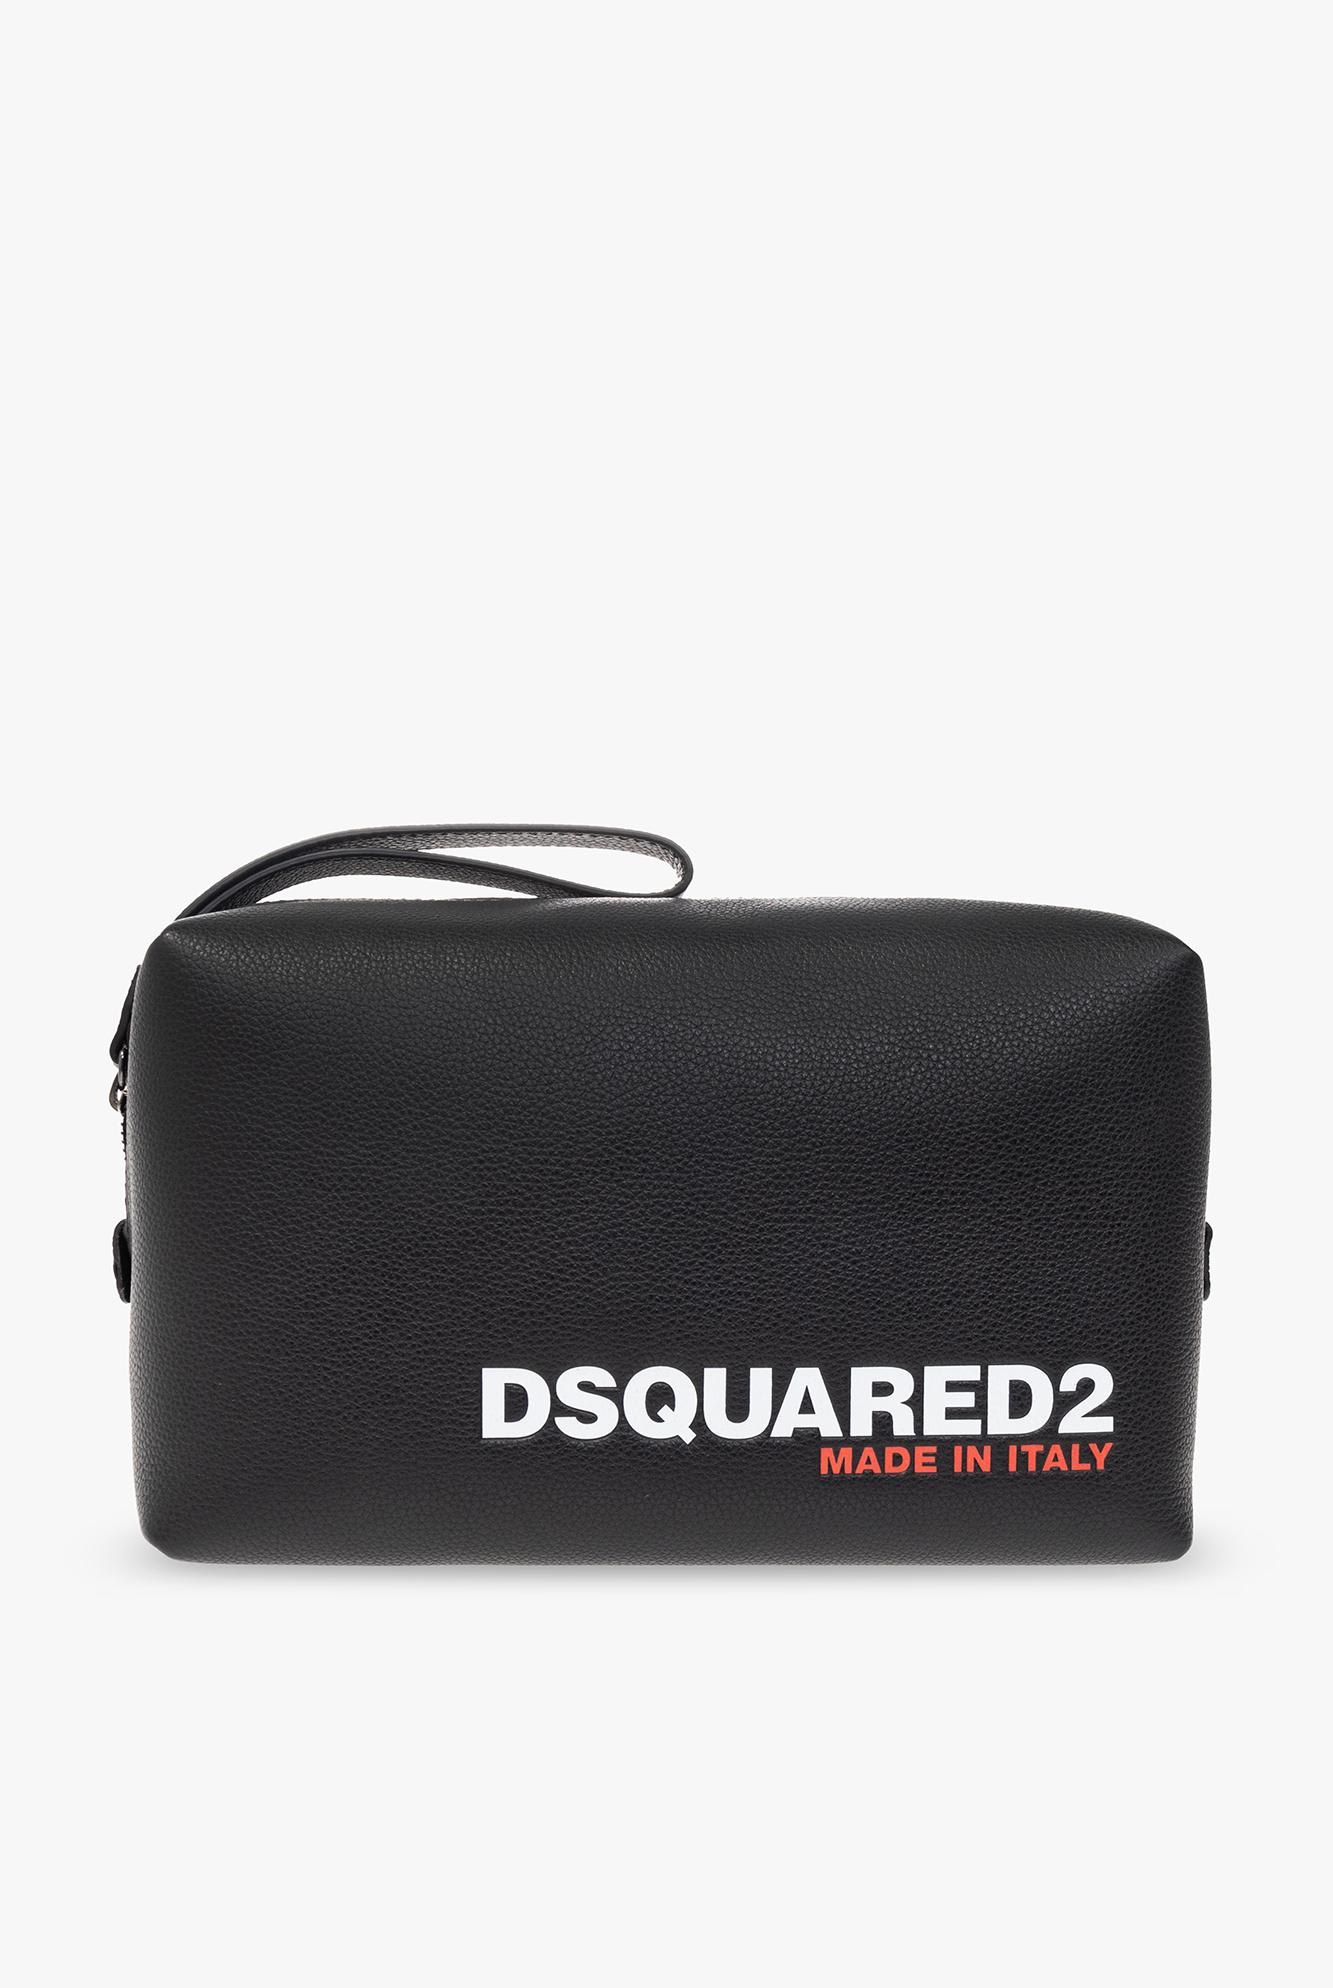 Dsquared2 Wash Bag With Logo In Black